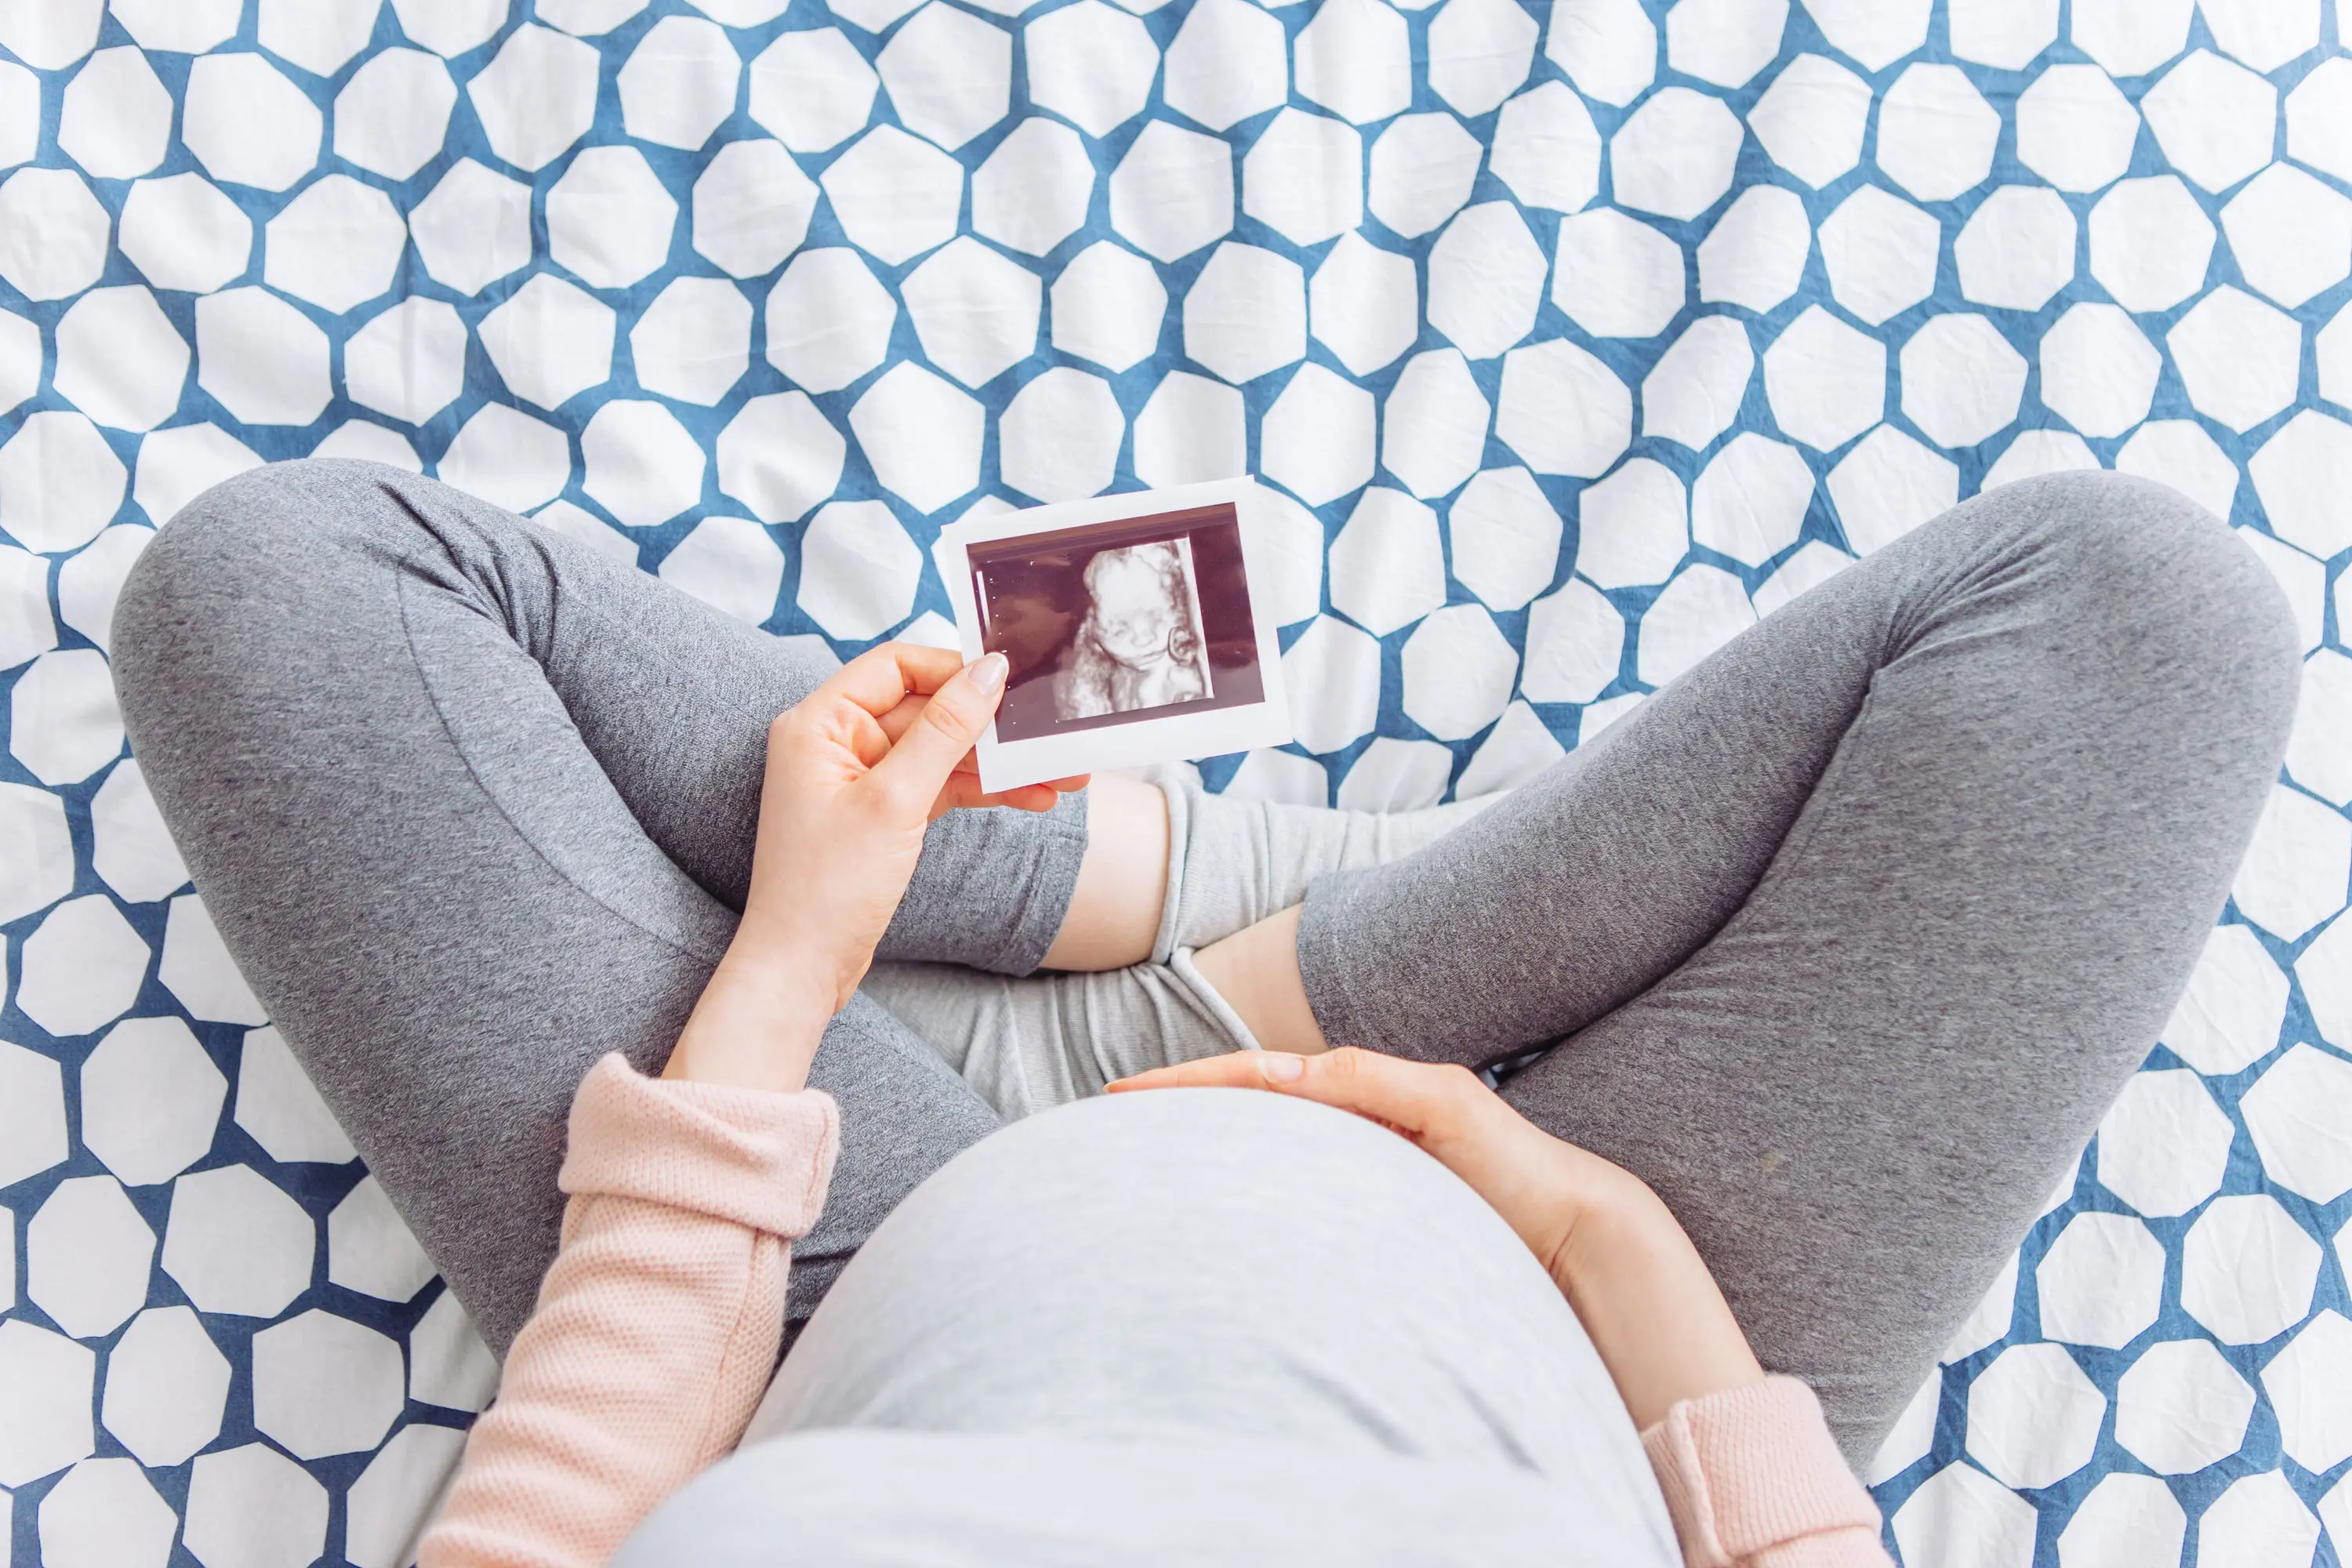 Pregnant woman looks at photo scaled